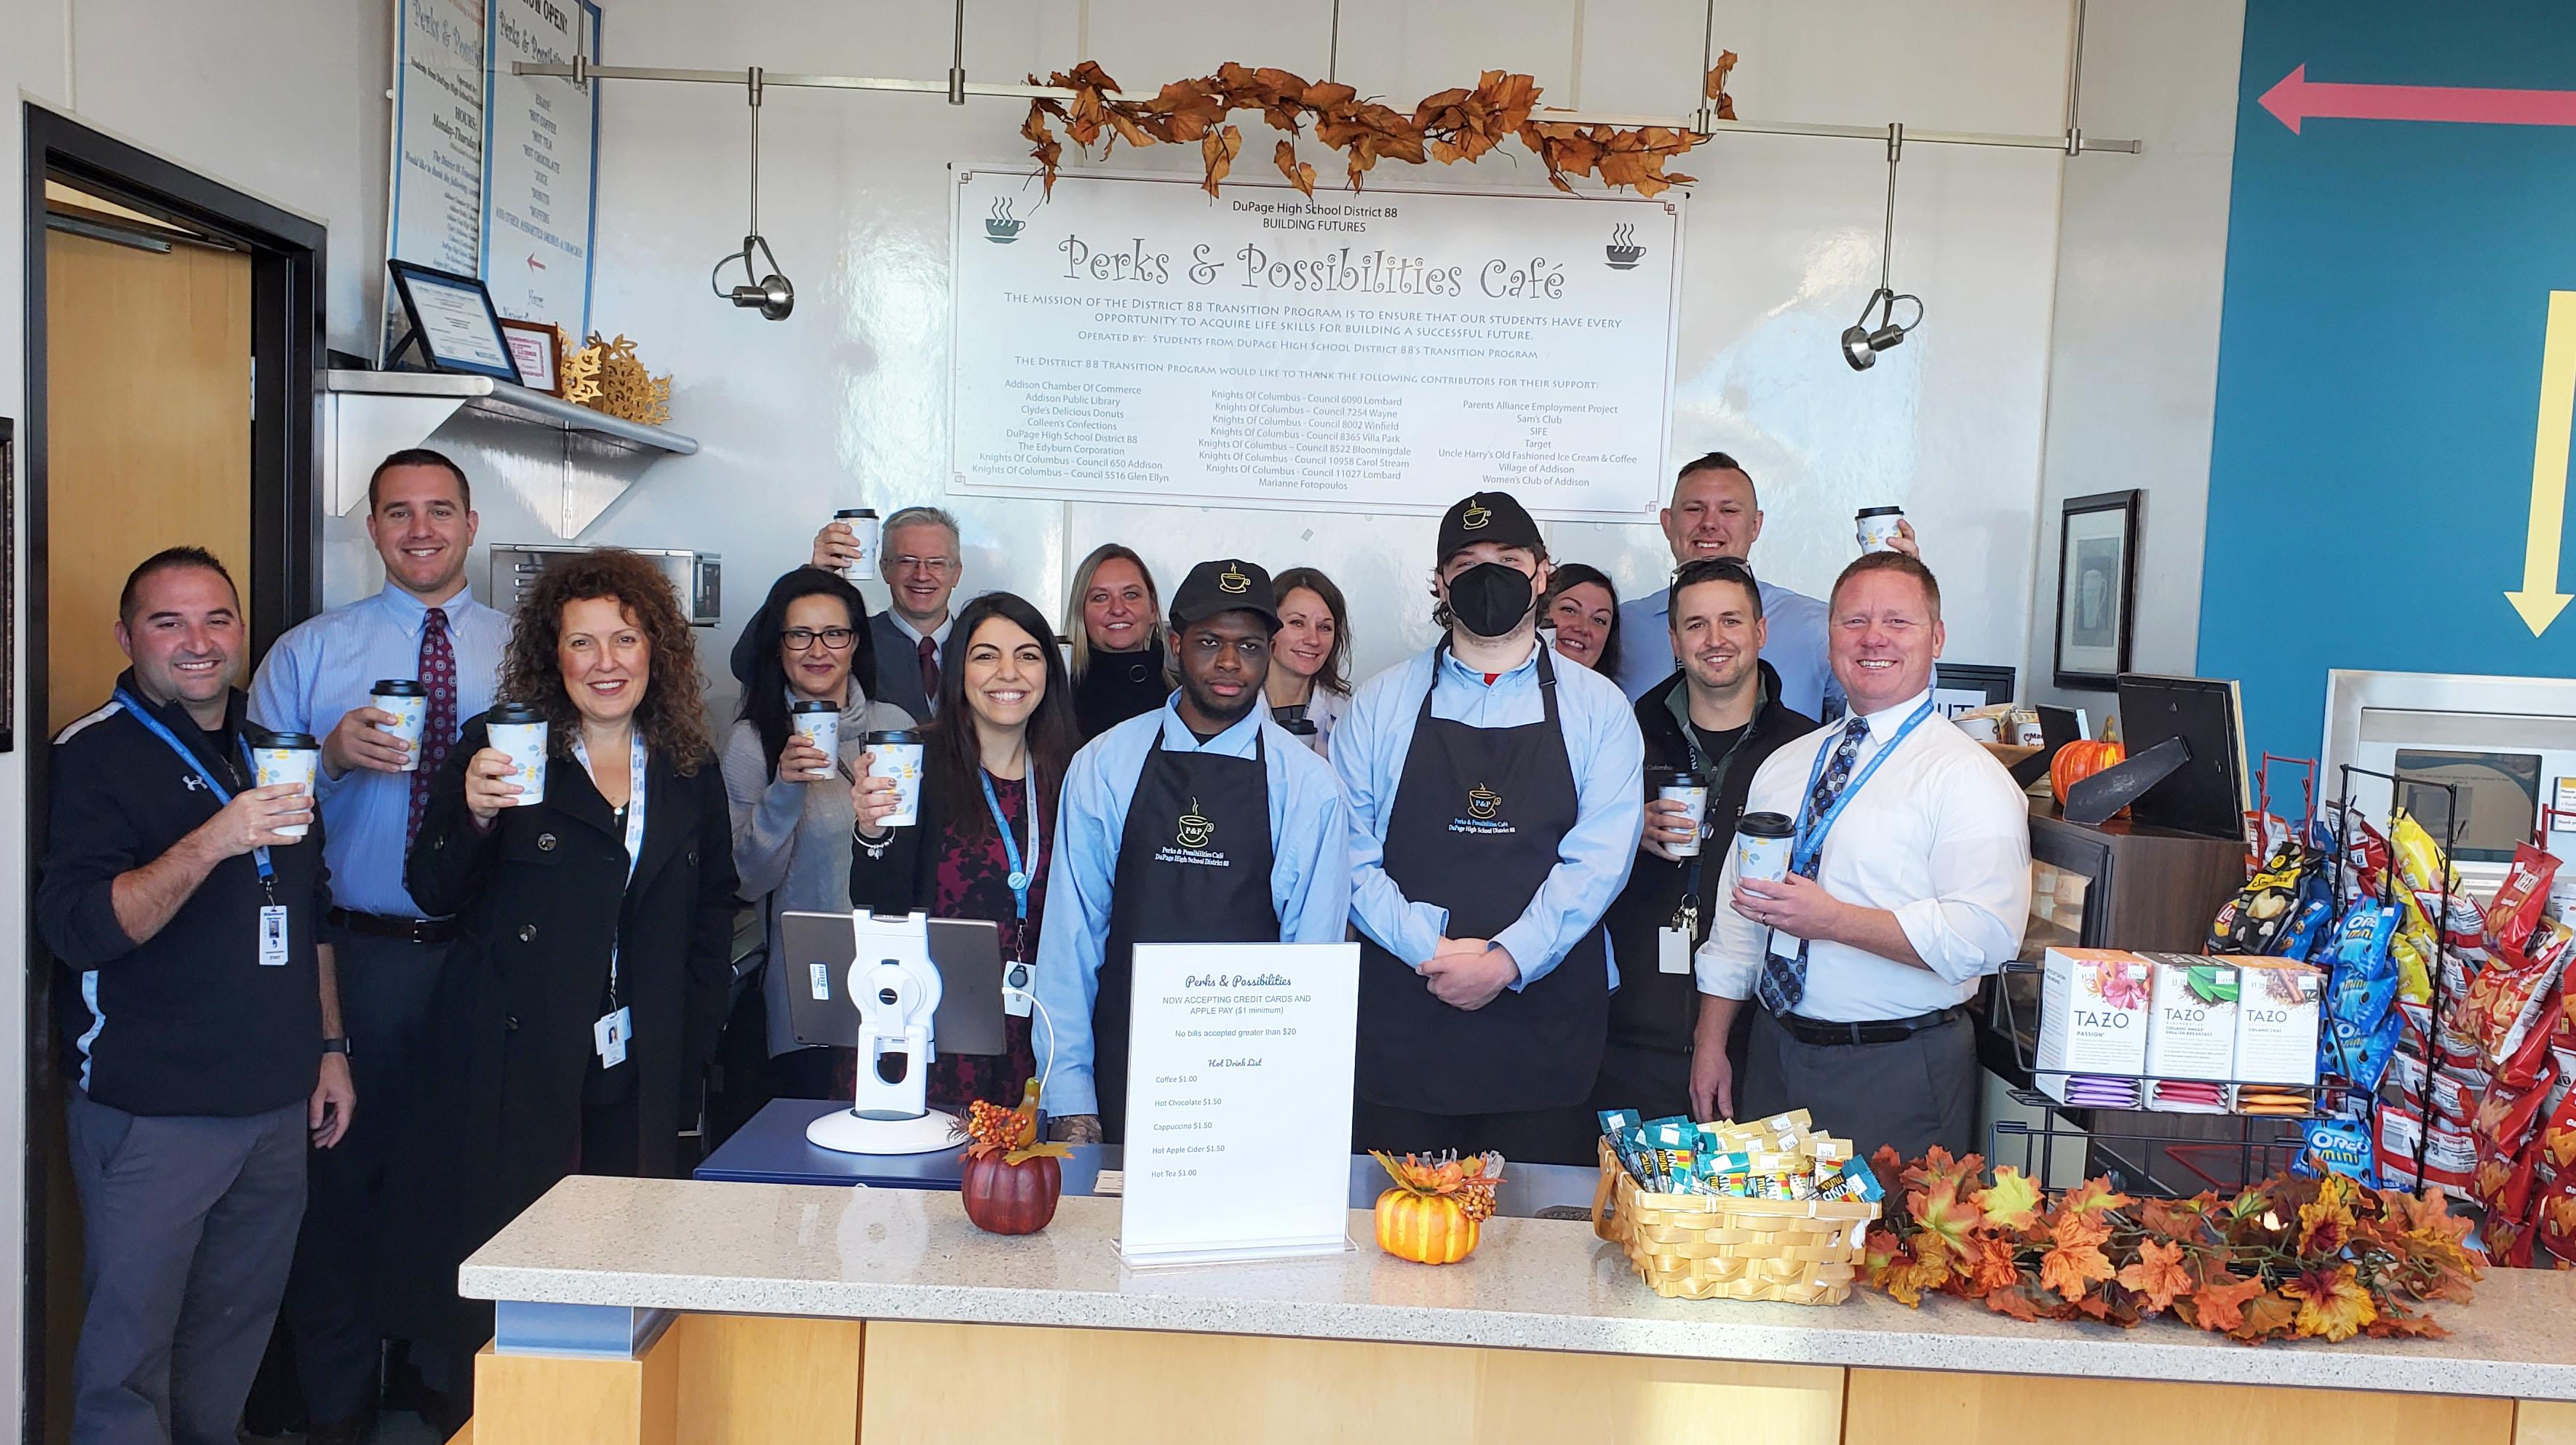 District 88 Transition Program’s Perks & Possibilities Café hosts Grand Reopening